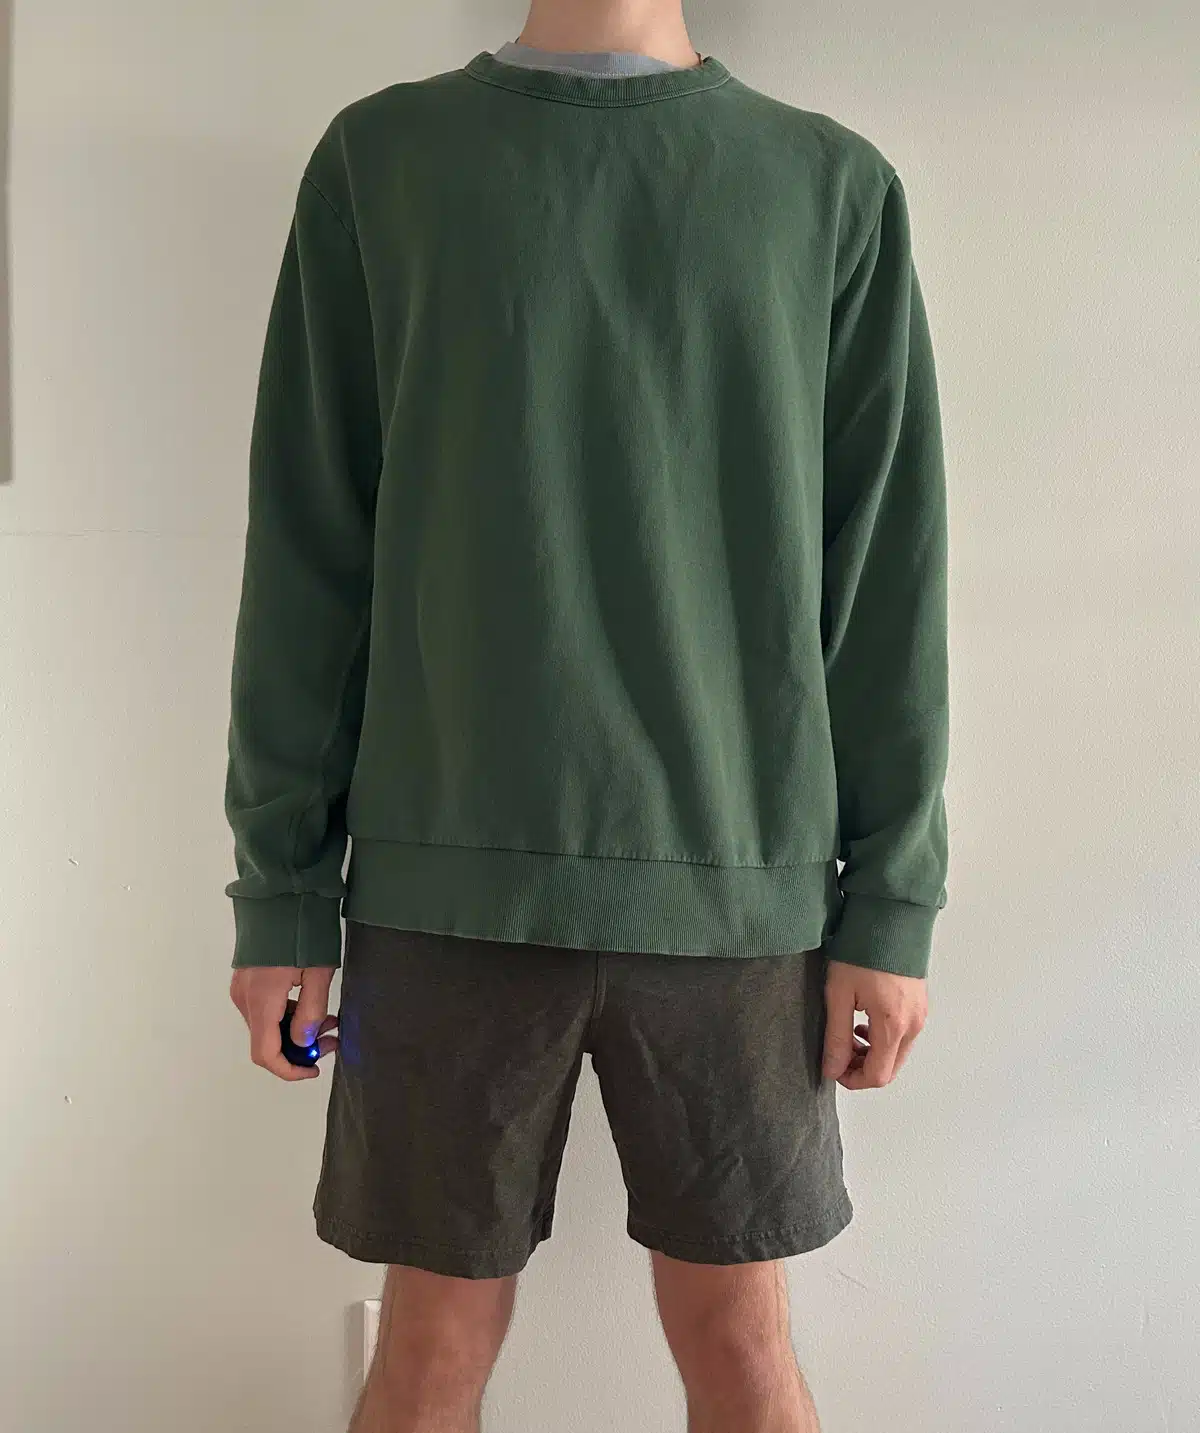 Pact Downtime Relaxed Sweatshirt in trekking green